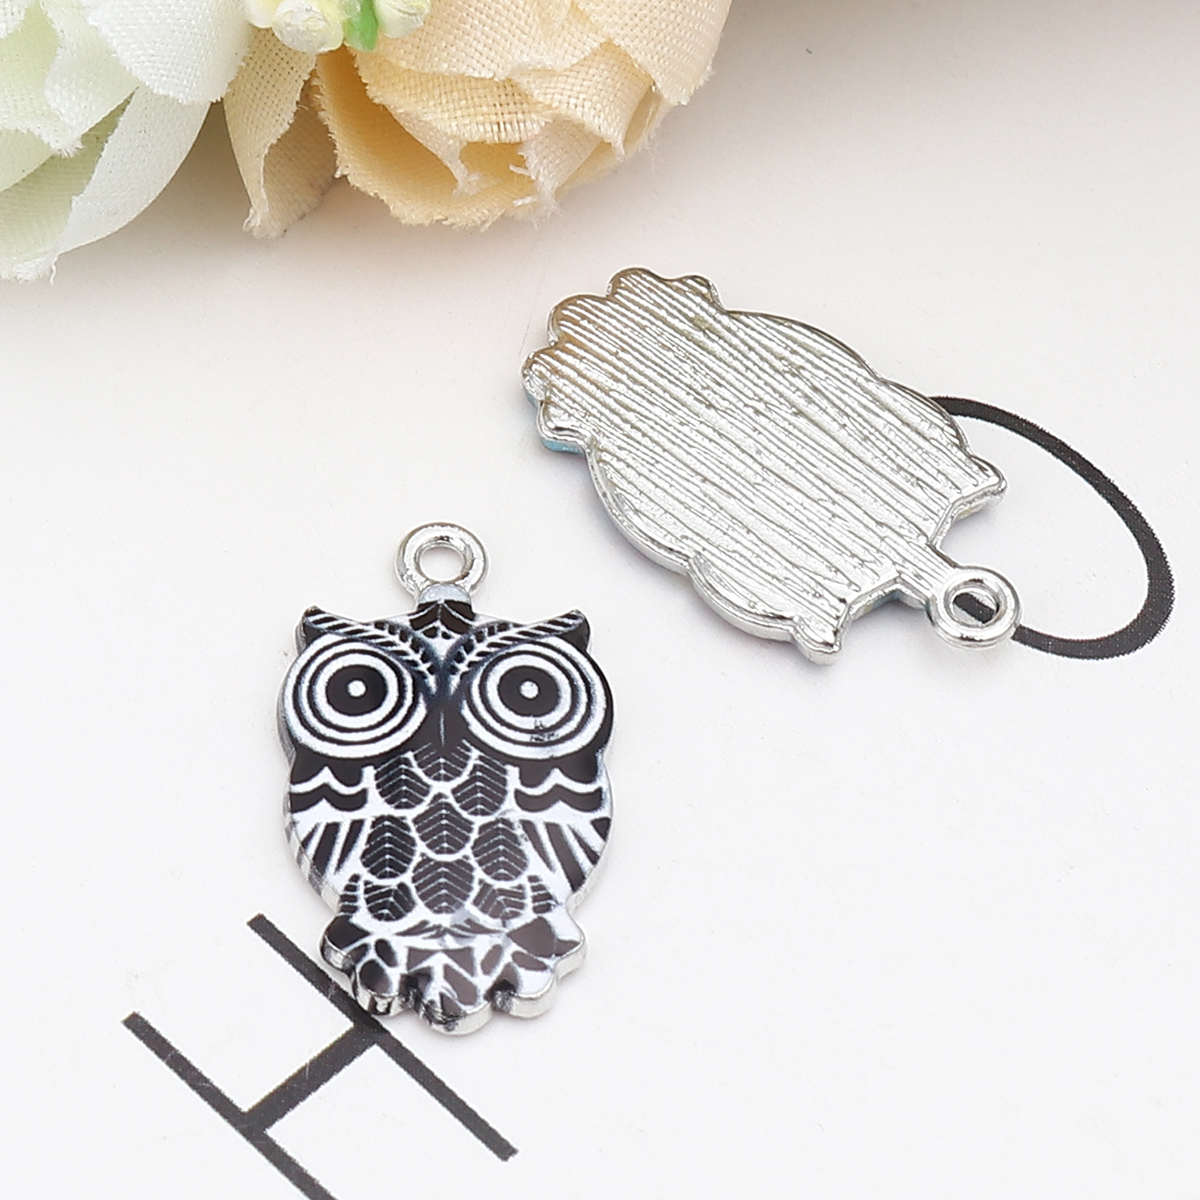 Picture of Zinc Based Alloy Halloween Charms Owl Animal Silver Tone Black & White Enamel 23mm x 13mm, 10 PCs